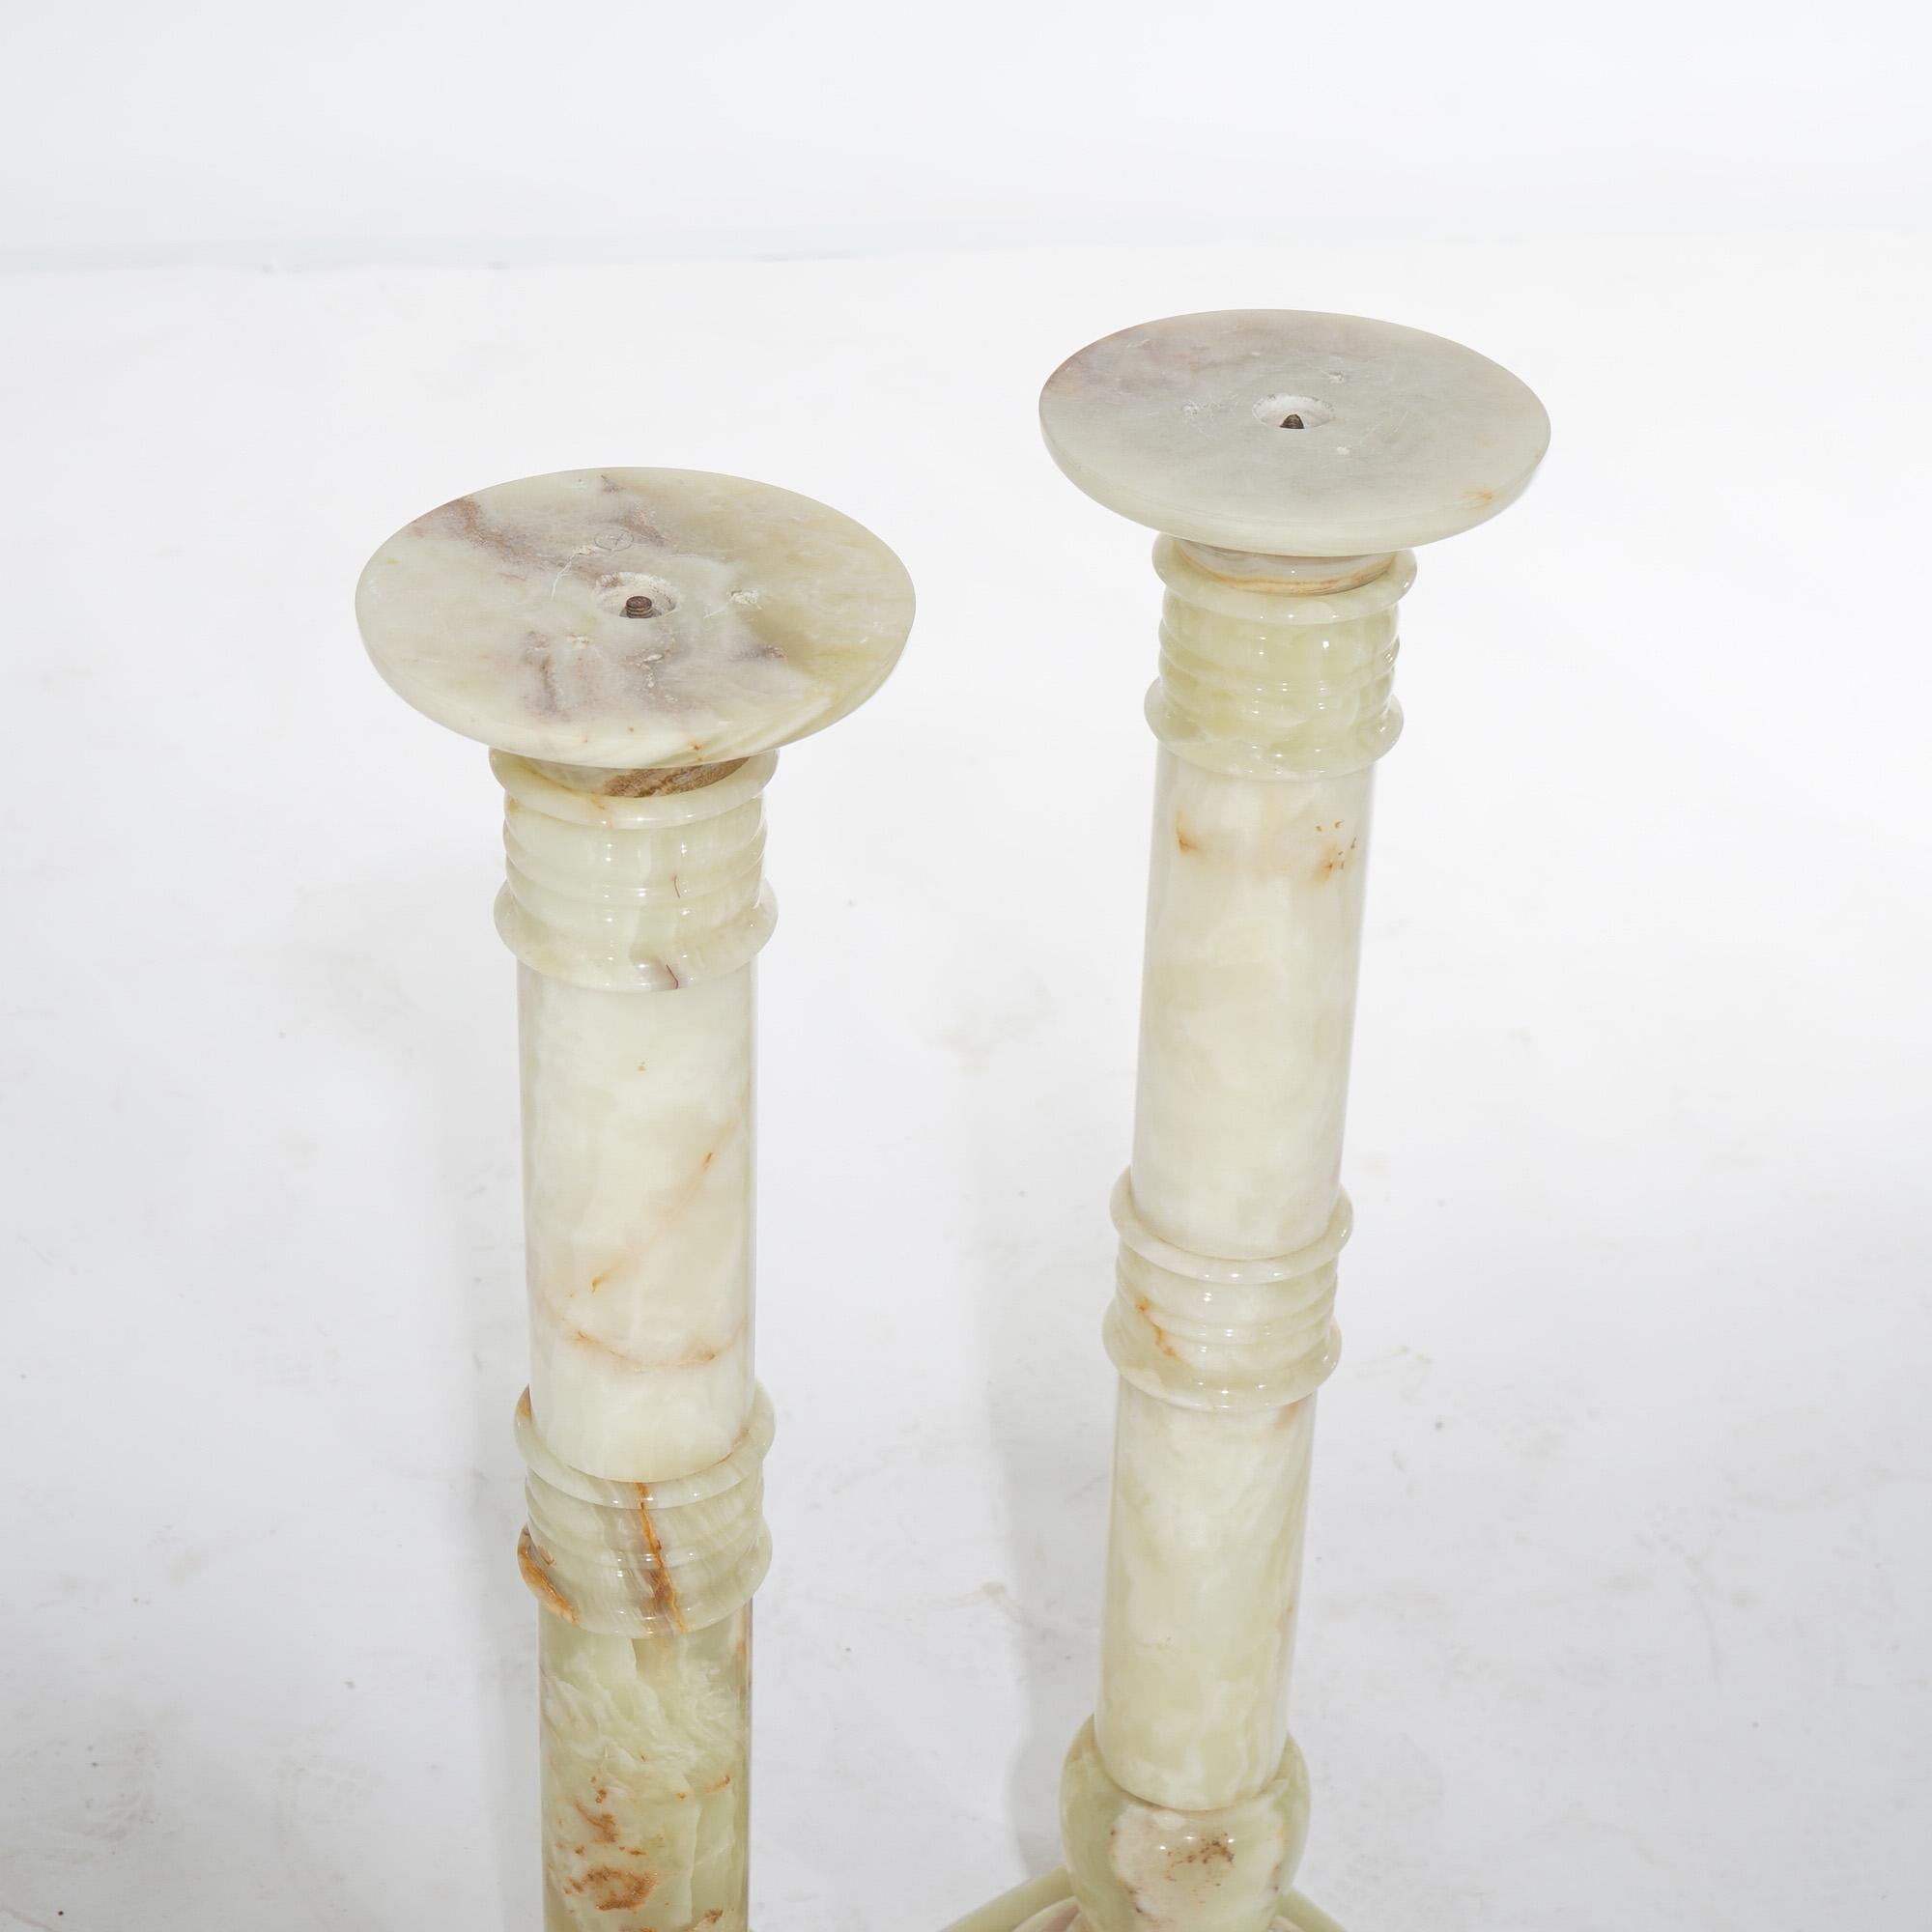 Antique Pair of Classical Carved Onyx Sculpture Display Pedestals Early 20th C For Sale 2